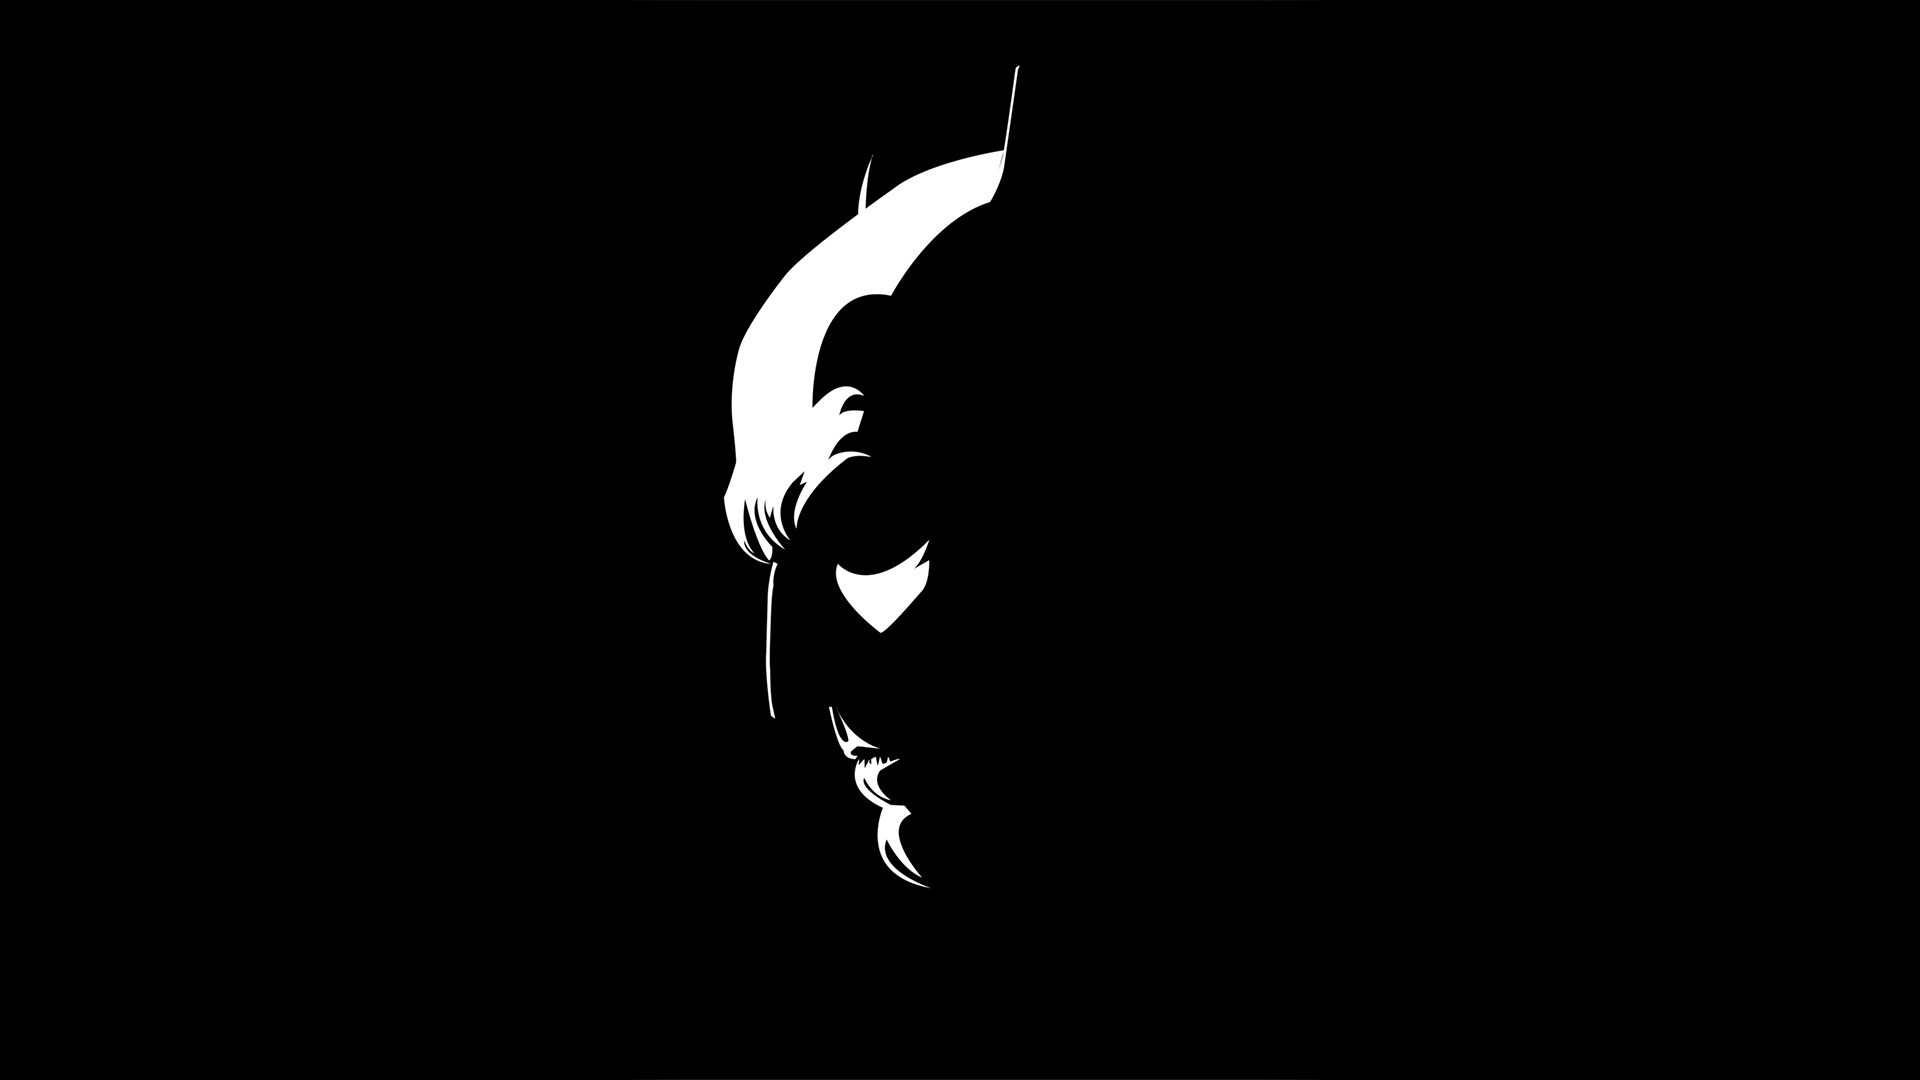 Batman Black And White, HD Superheroes, 4k Wallpapers, Image, Backgrounds, Photos and Pictures